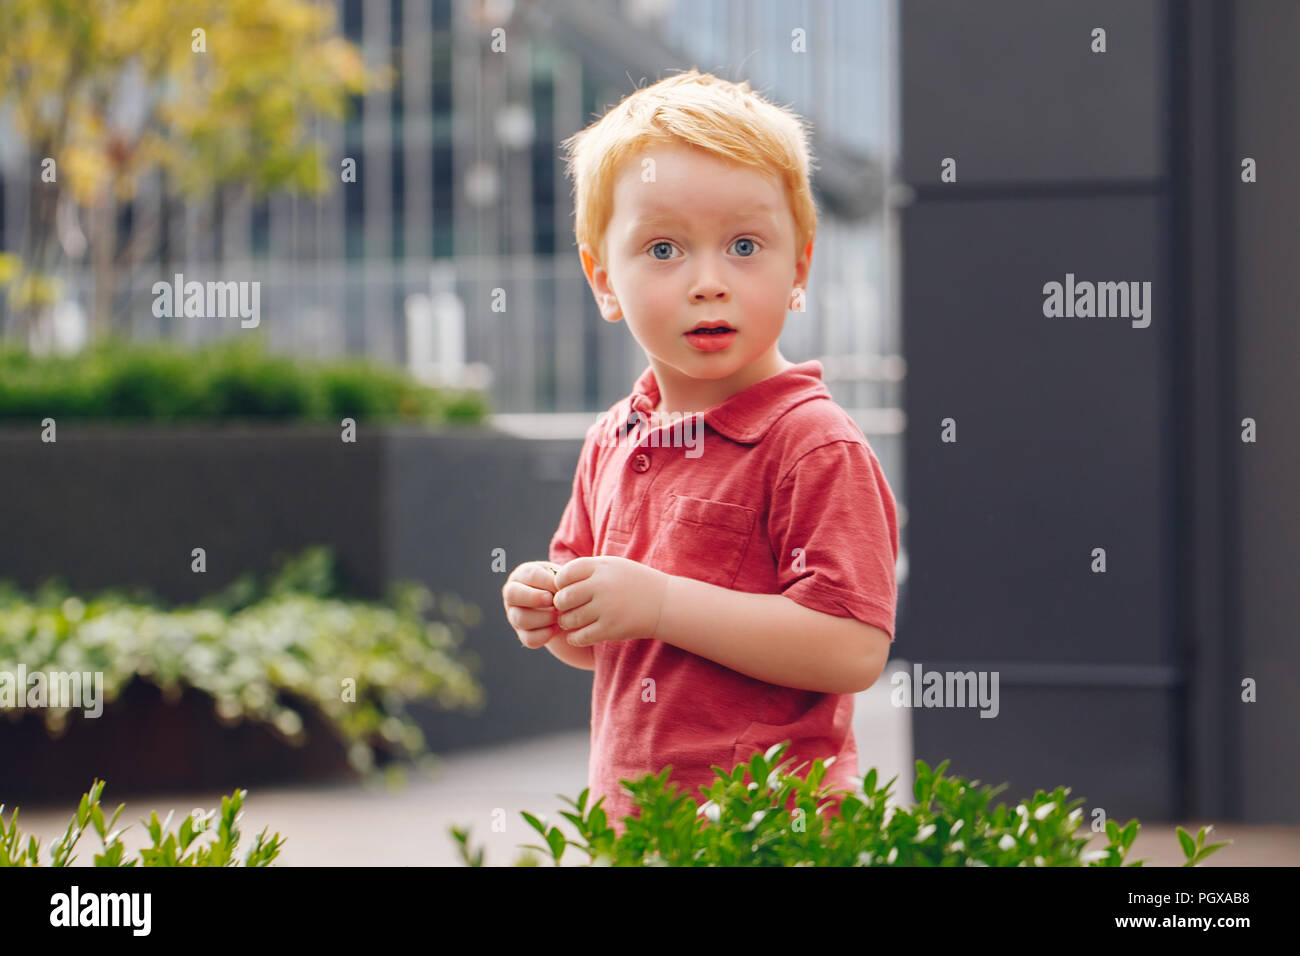 Closeup portrait of cute adorable little red-haired Caucasian boy child in red t-shirt standing in park outside looking in camera. Happy lifestyle chi Stock Photo